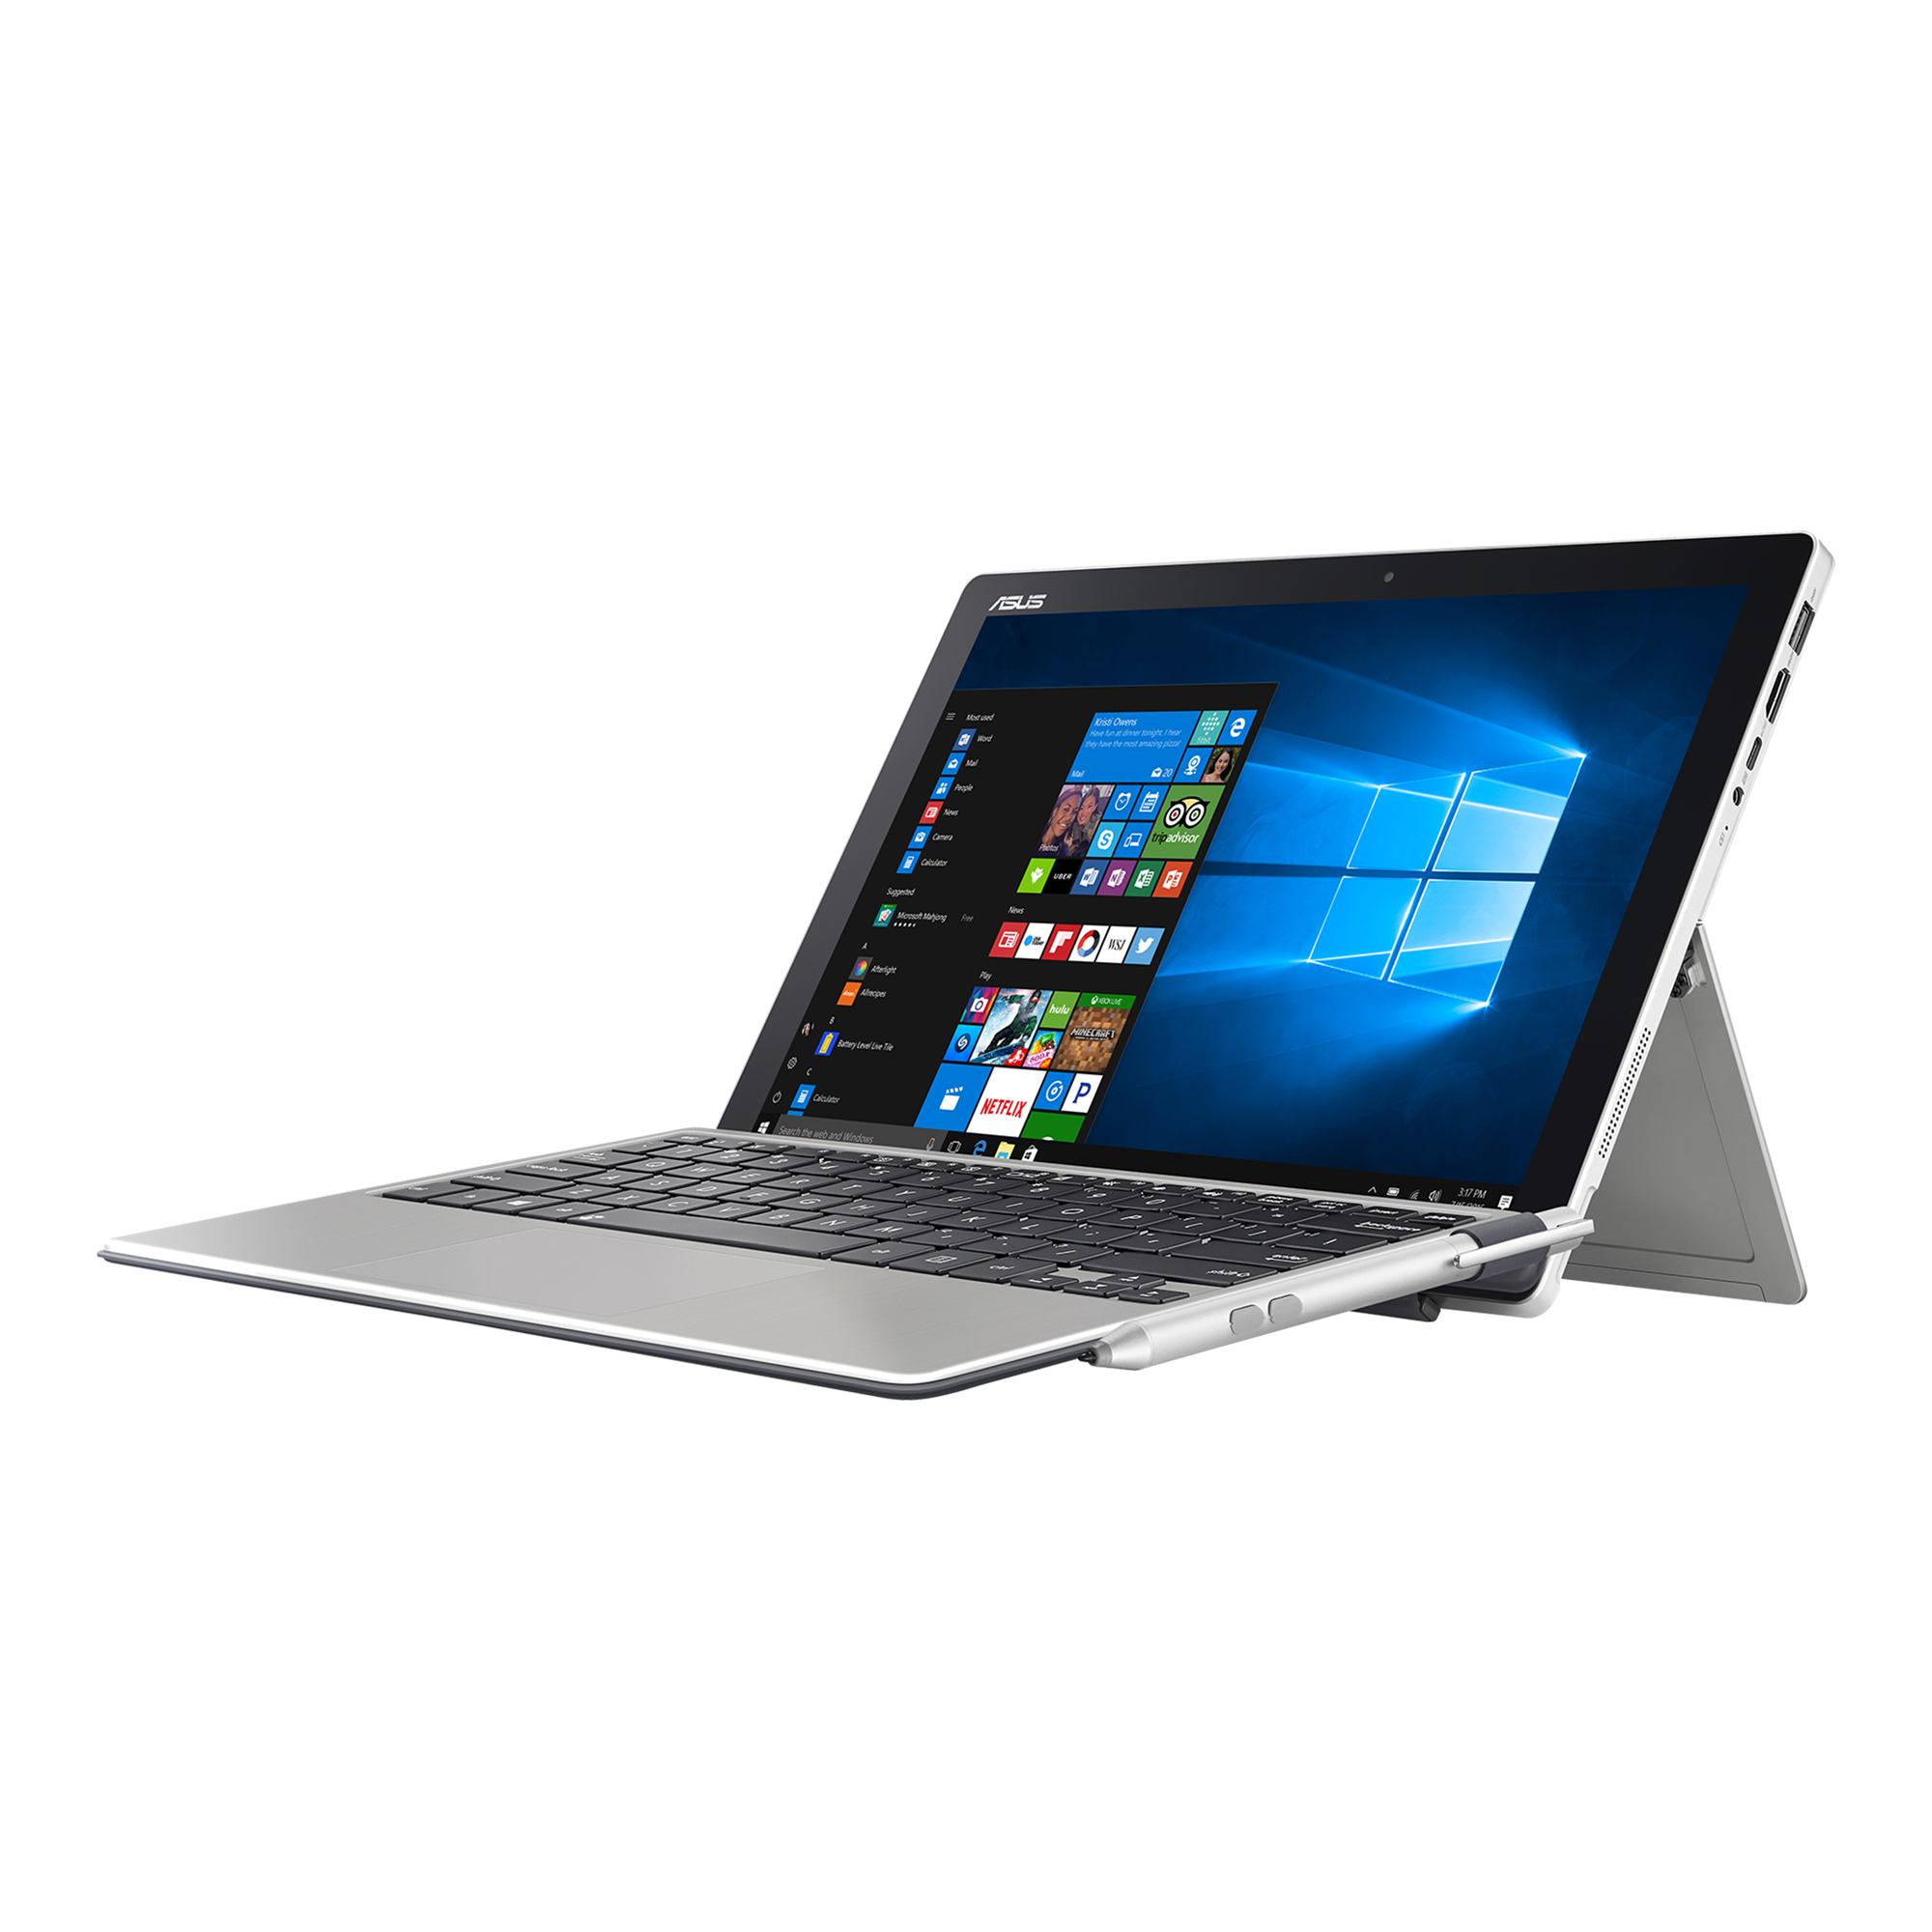 ASUS Transformer Pro T304｜Laptops For Students｜ASUS Canada